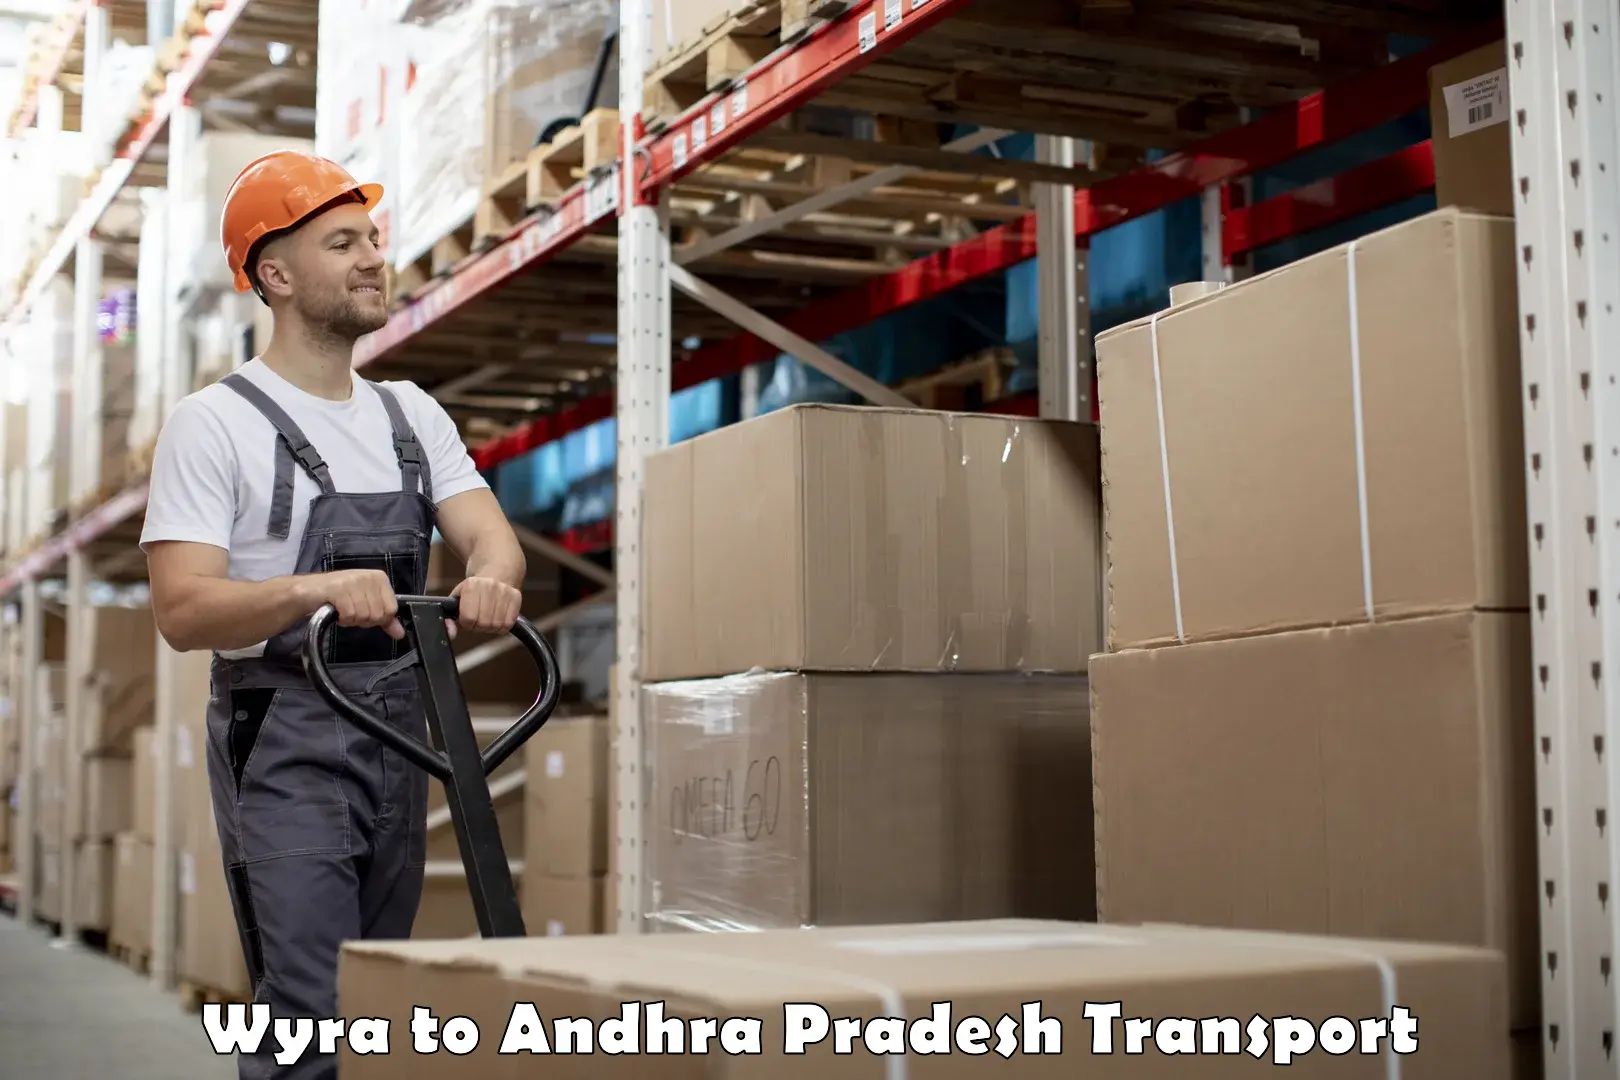 Truck transport companies in India Wyra to Andhra Pradesh